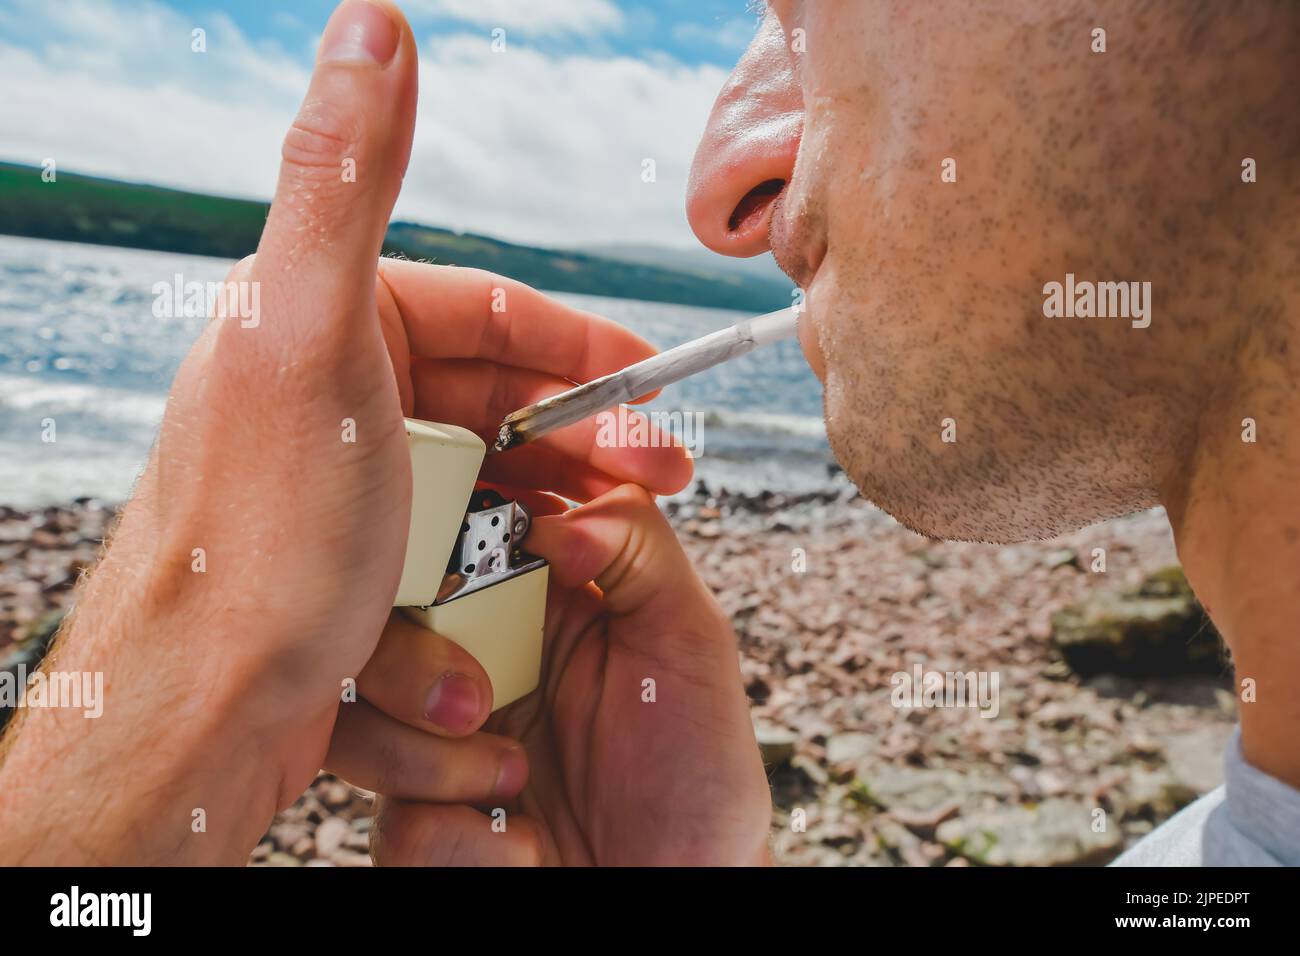 Detail of a man lighting up a marijuana or weed joint outdoors on the shore of a lake. Stock Photo